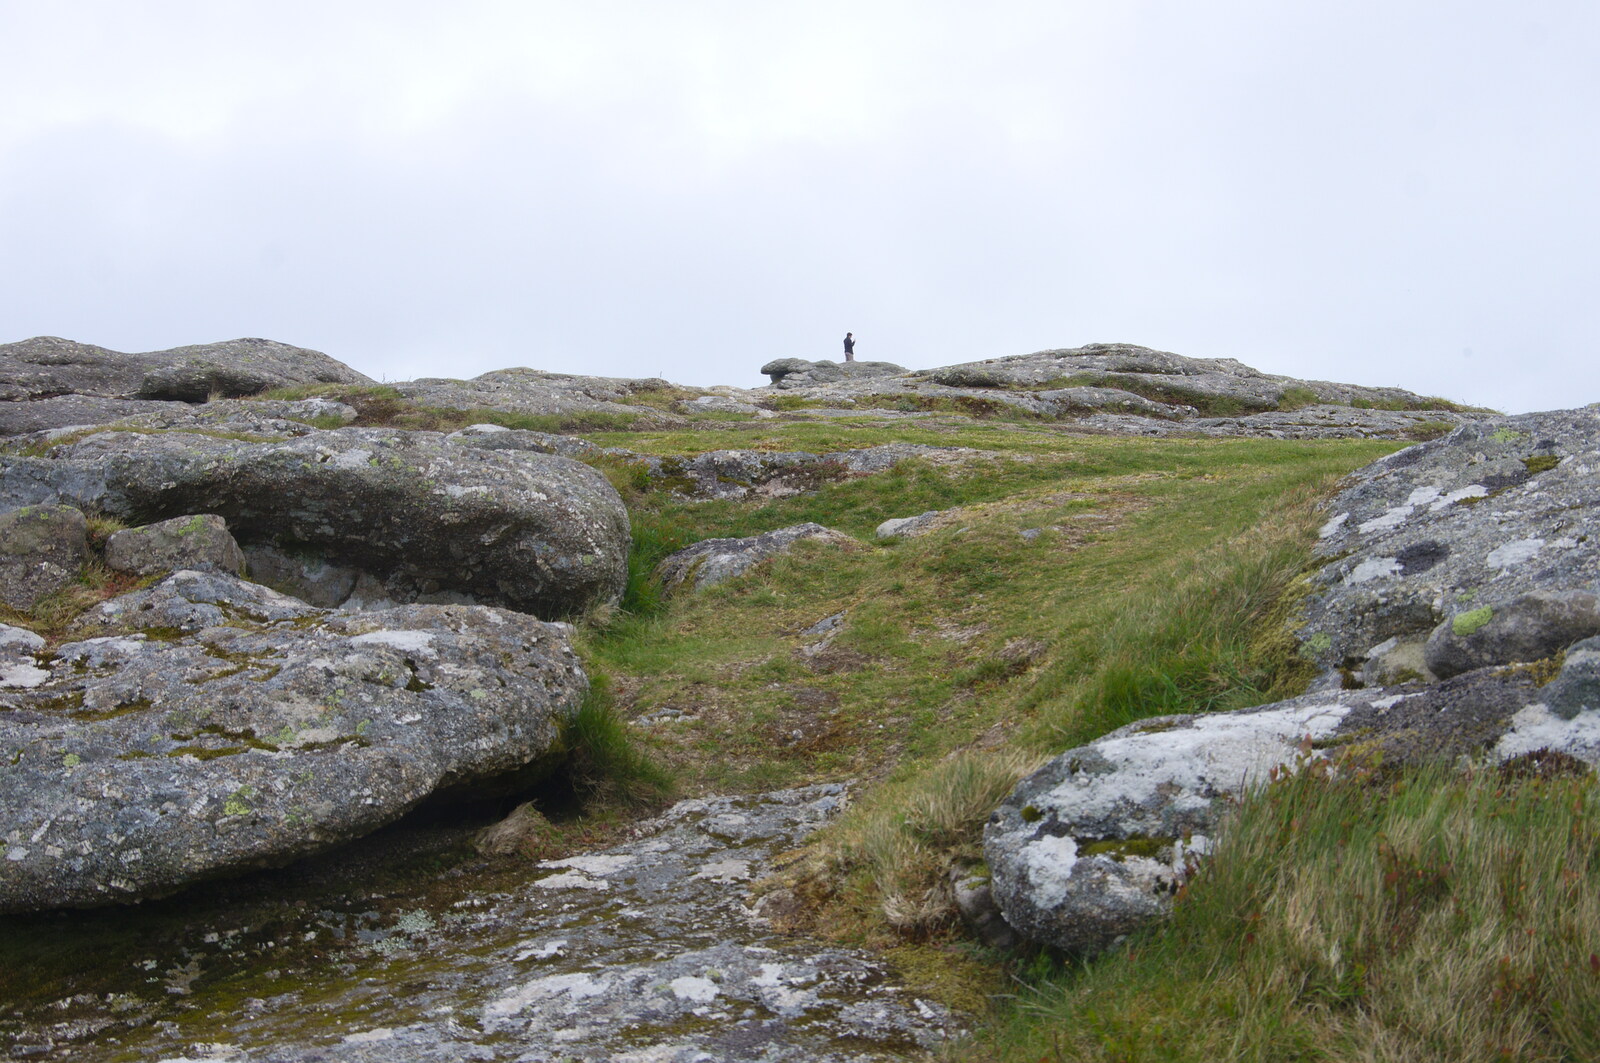 Someone in the distance is a dot on the granite from The Tom Cobley and a Return to Haytor, Bovey Tracey, Devon - 27th May 2019